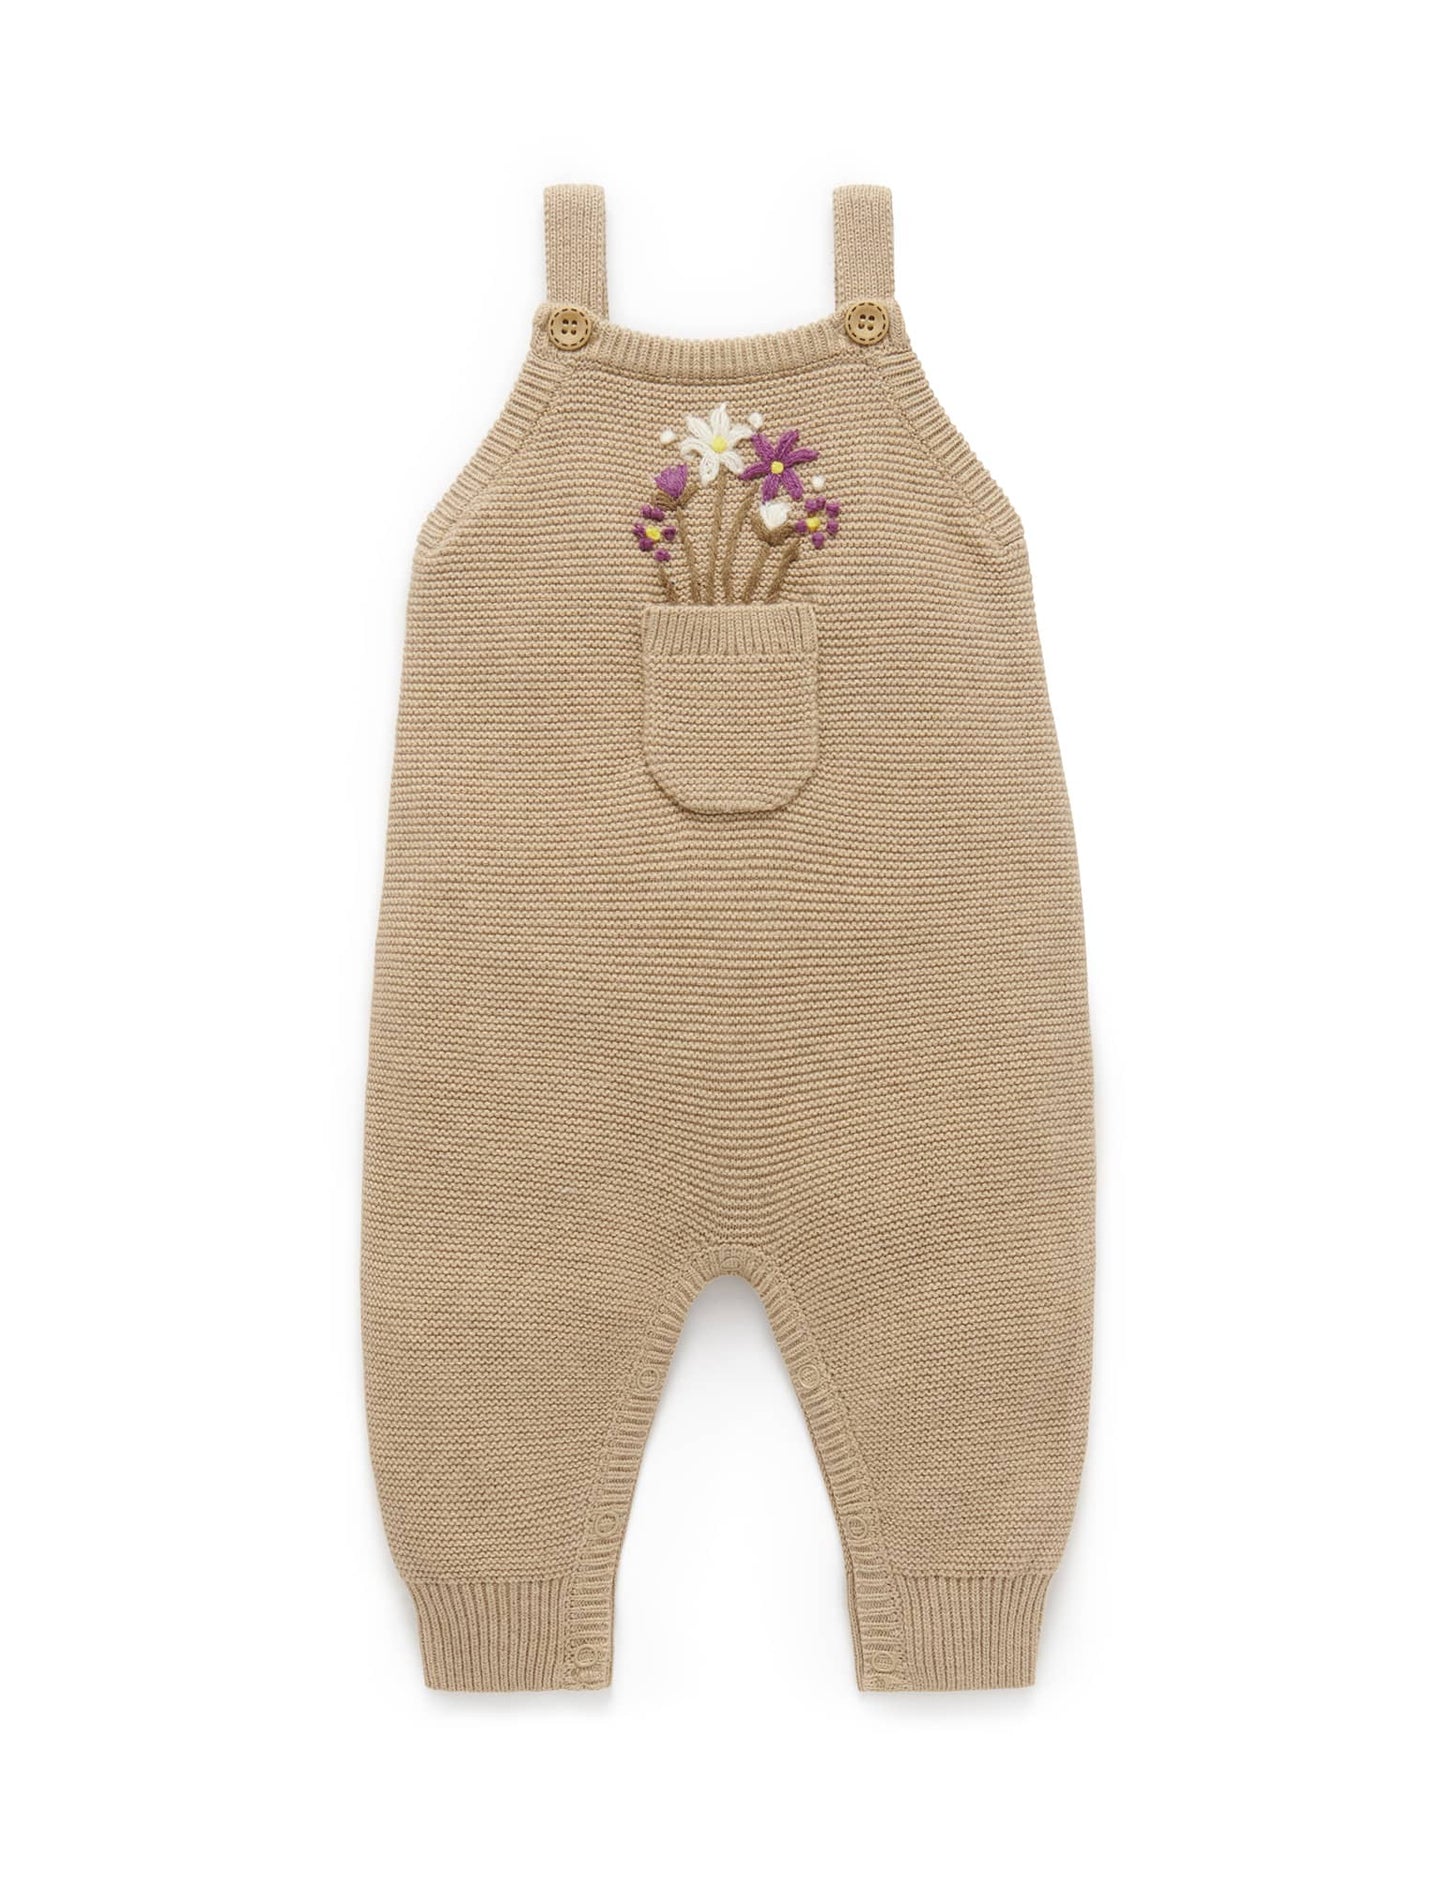 Purebaby - Posie Knitted Overalls